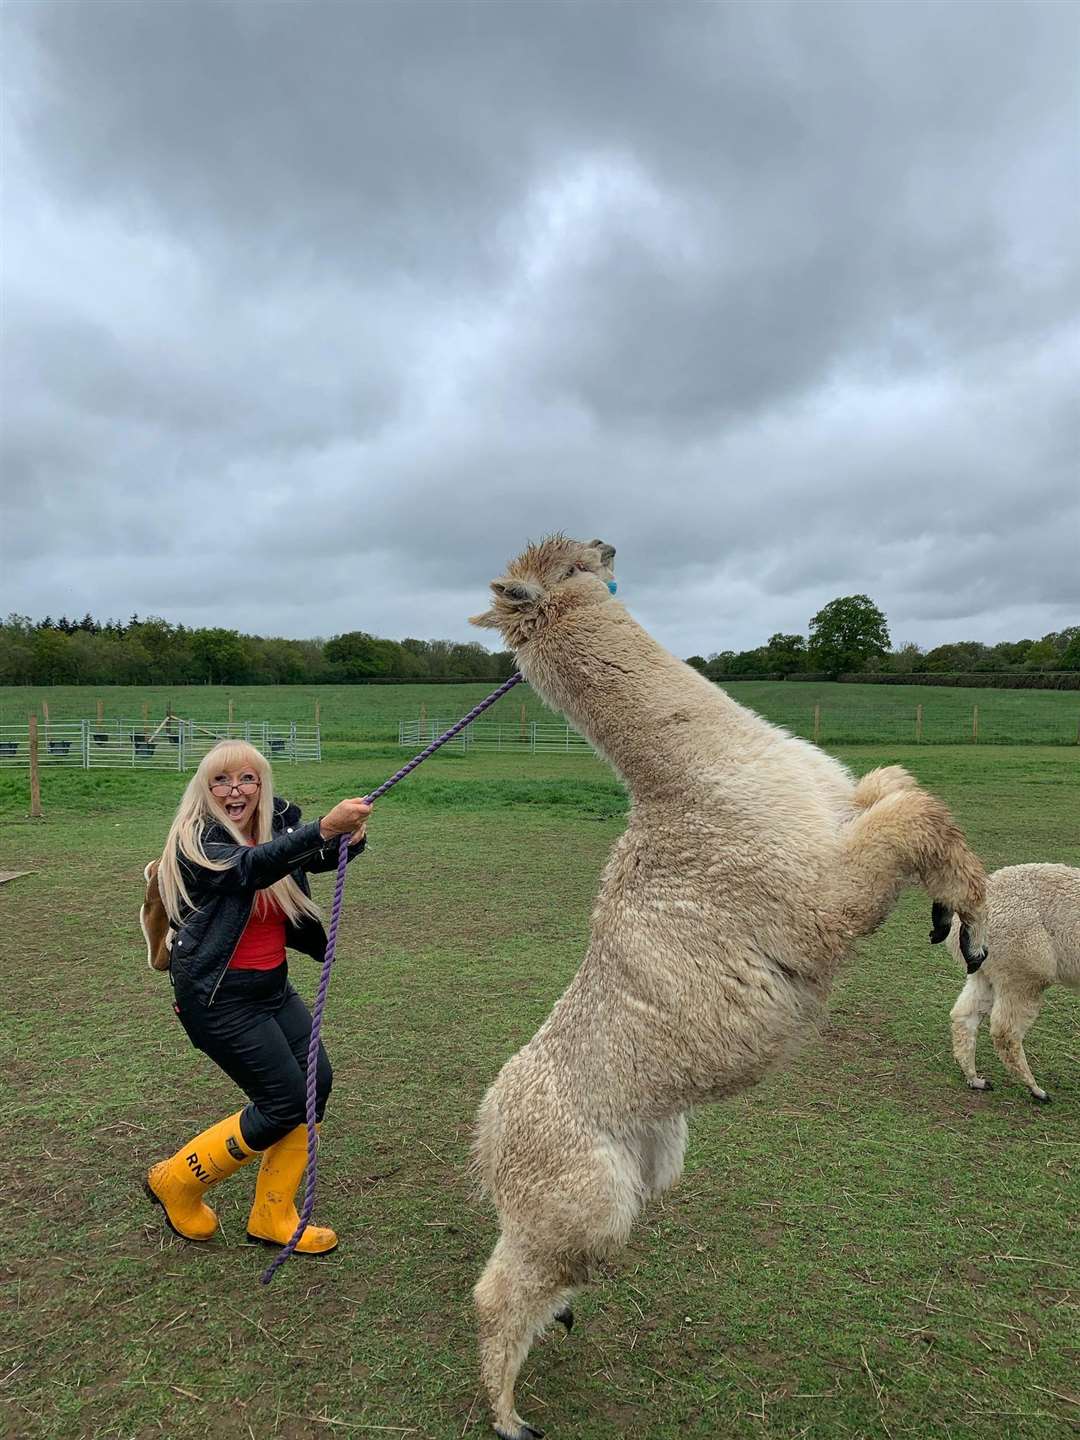 A-llama-ing! Margaret Flo McEwan is walking a mile a day in yellow wellies to raise money for the RNLI at Sheerness on Sheppey